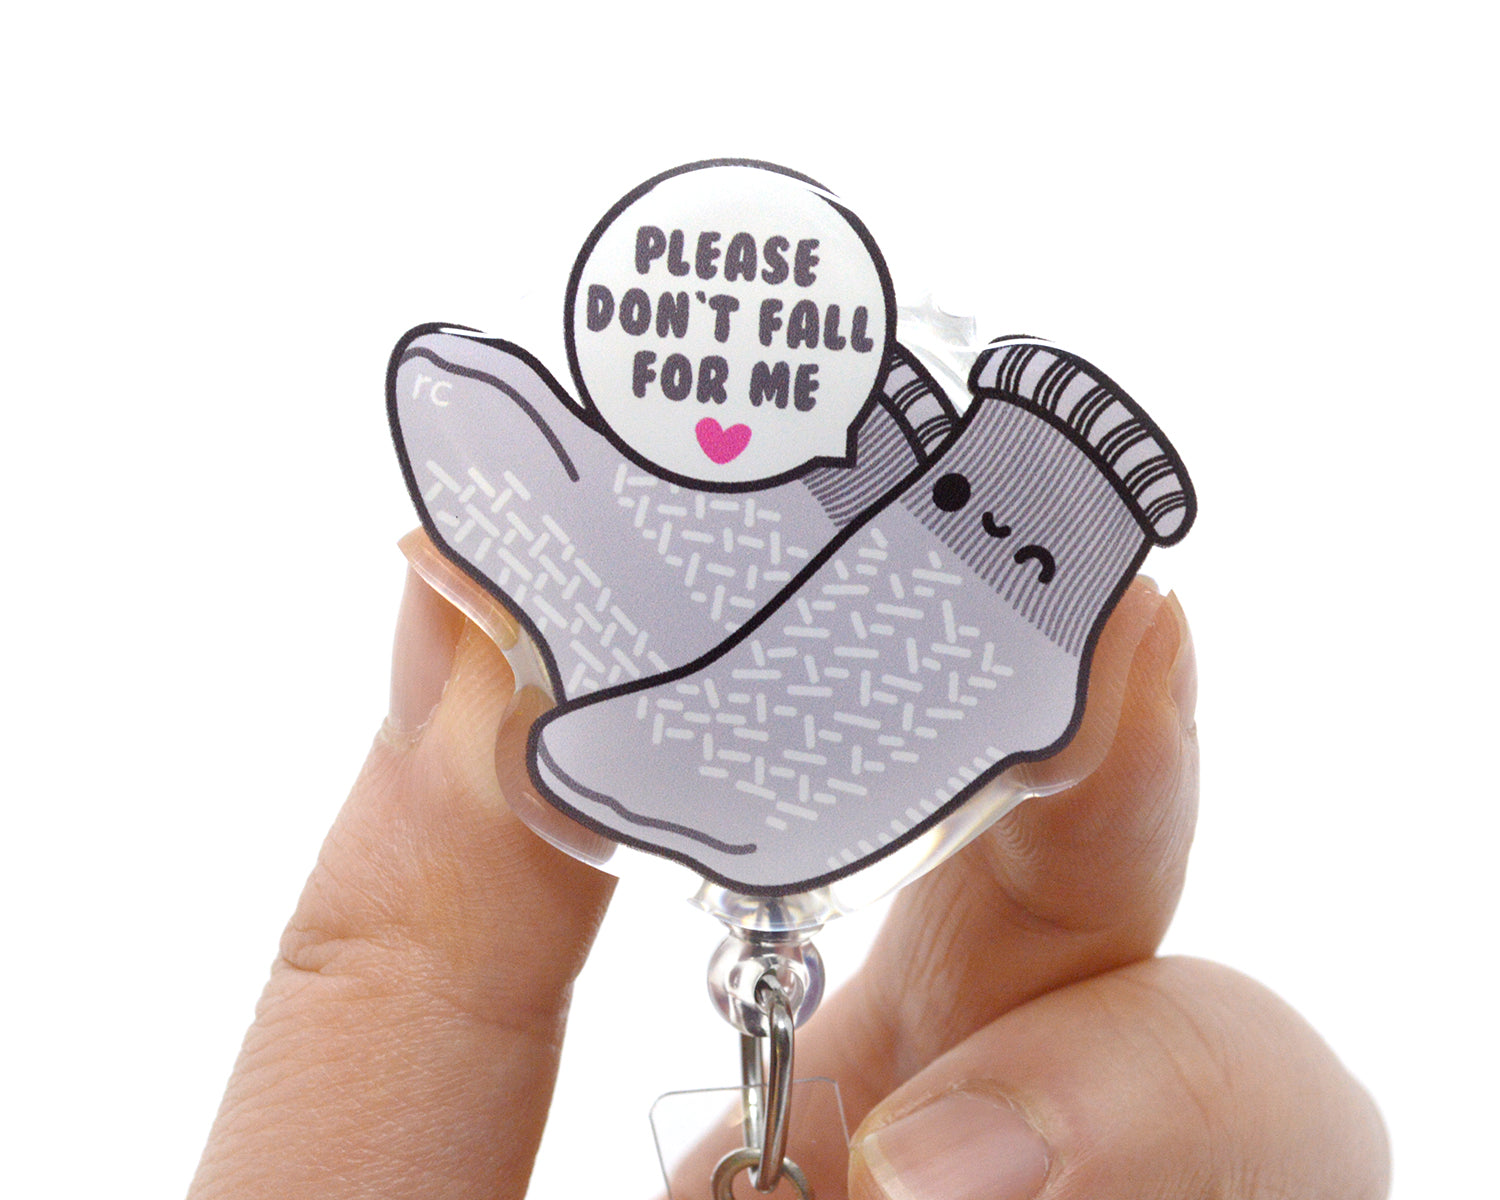 roocharms - Scientifically cute gifts with a dose of humor!